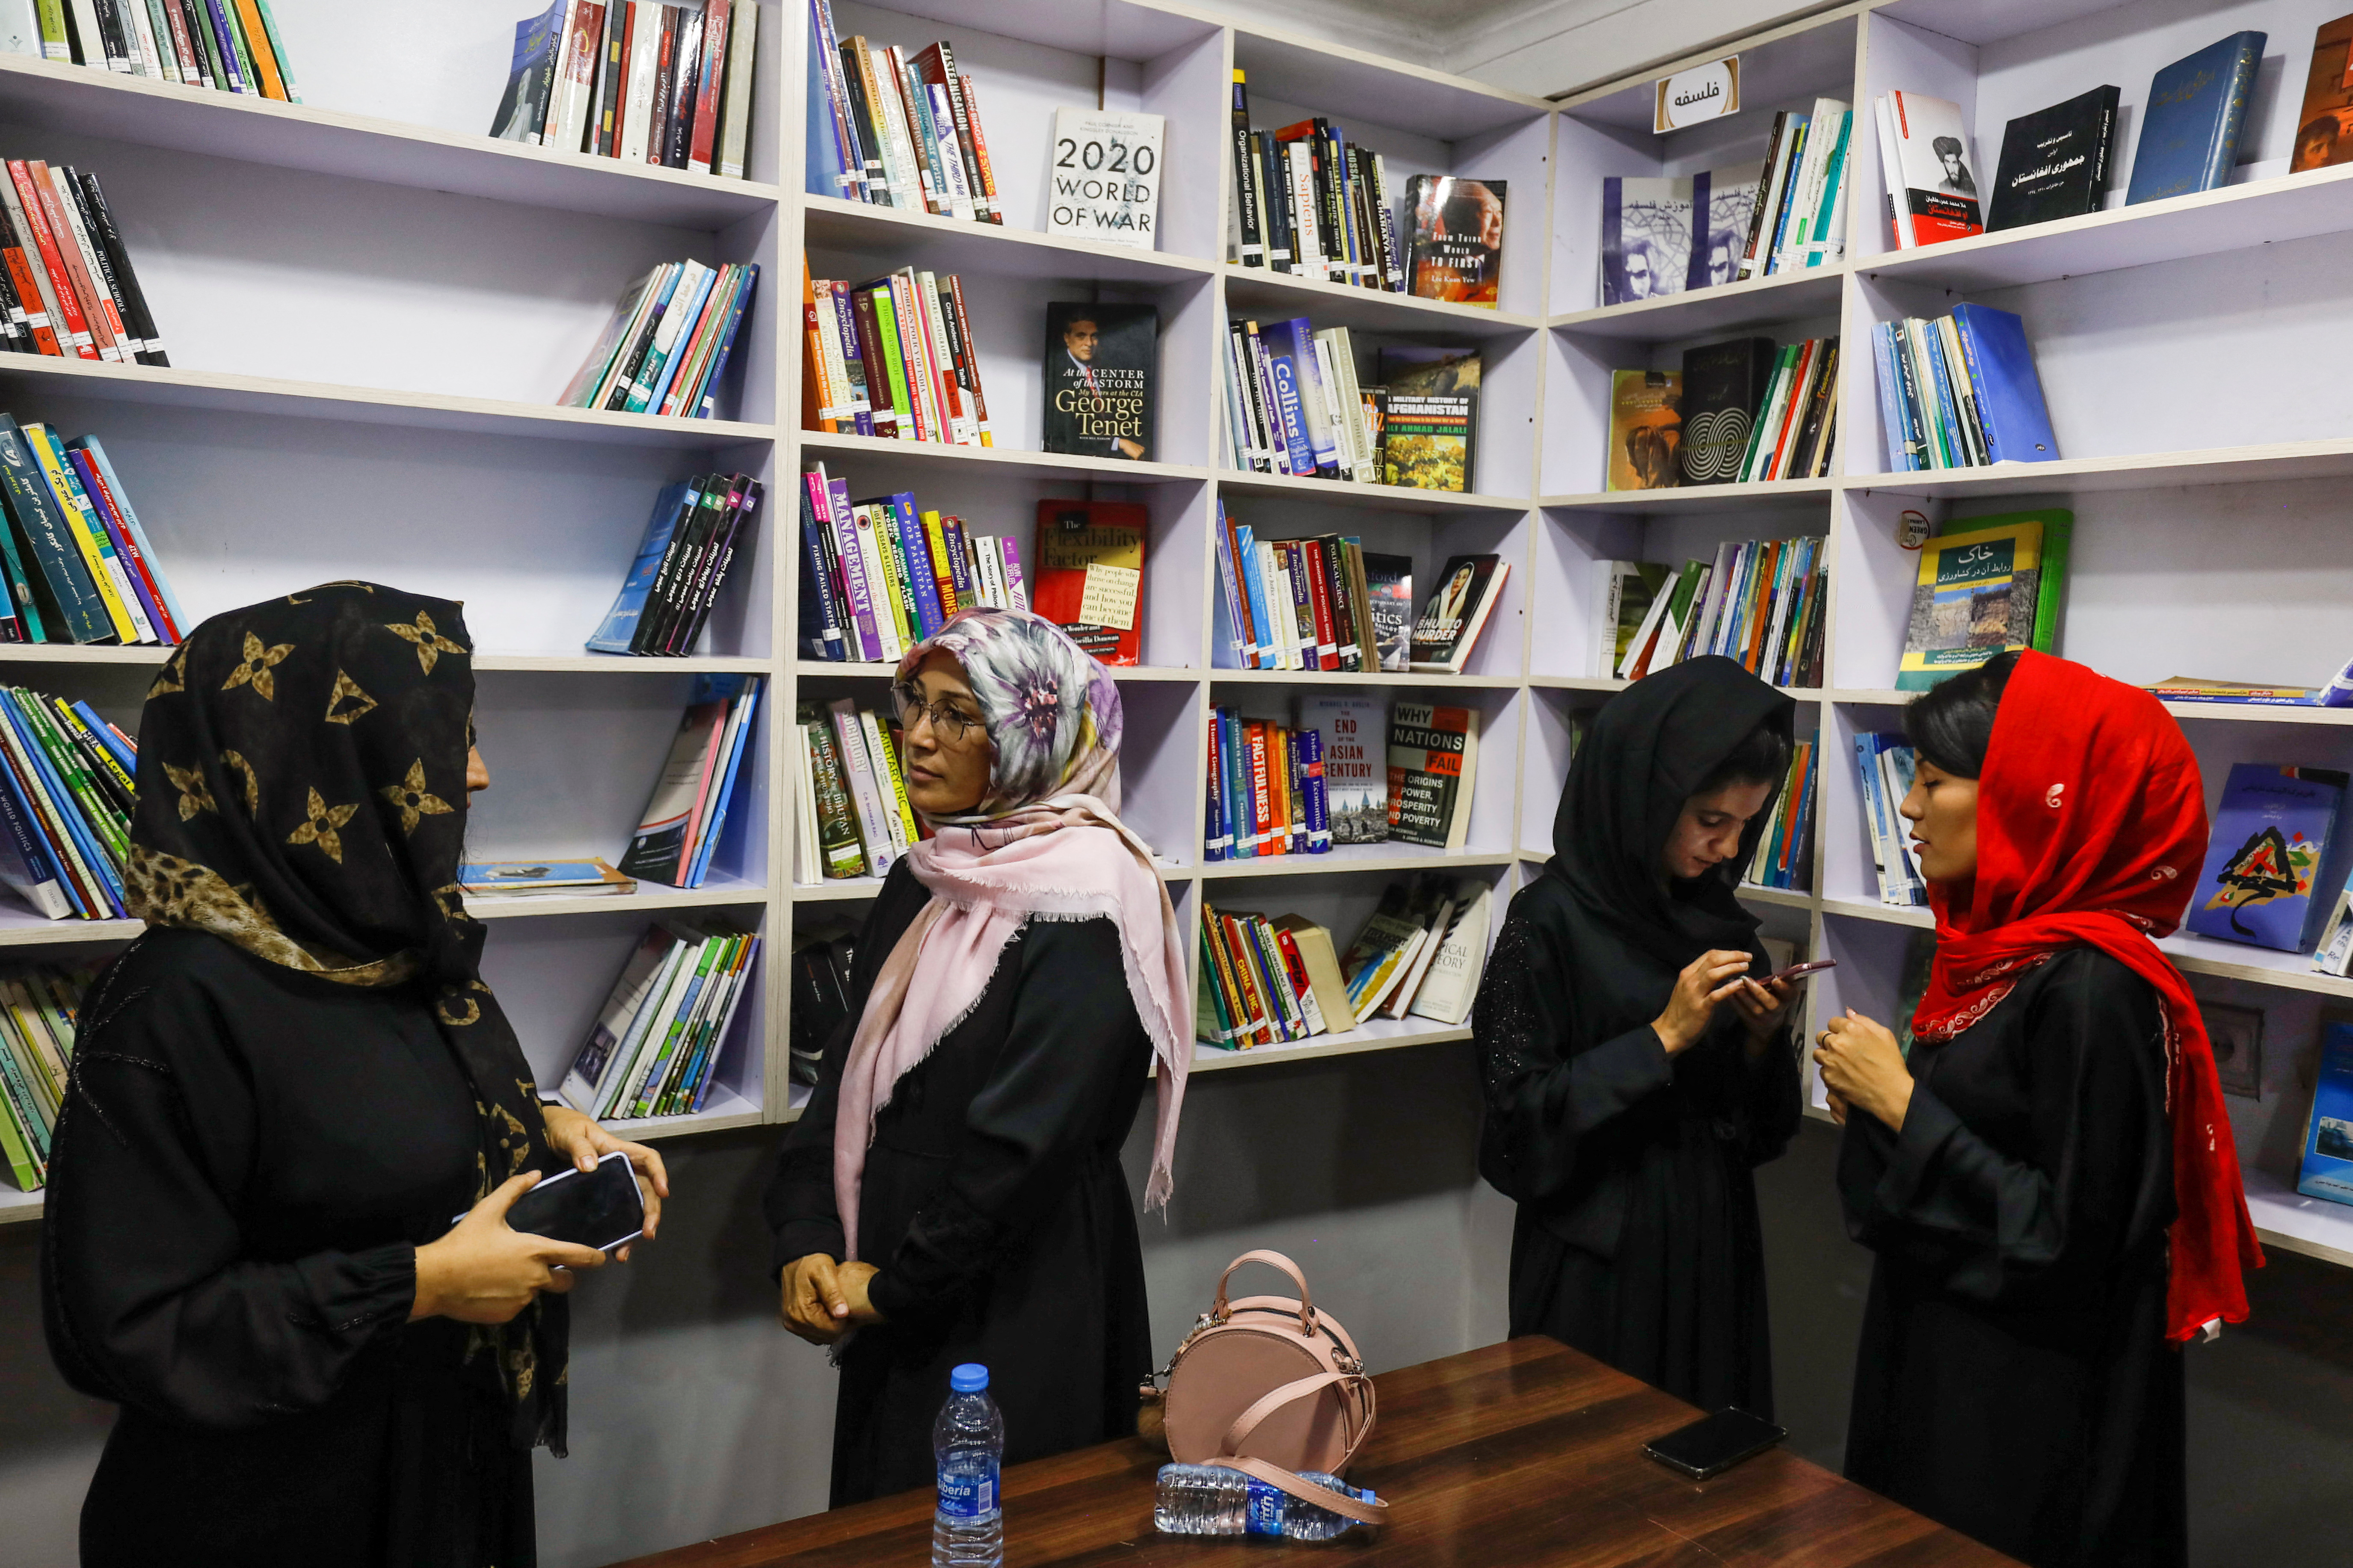 Afghan women attend the inauguration of women's library in Kabul